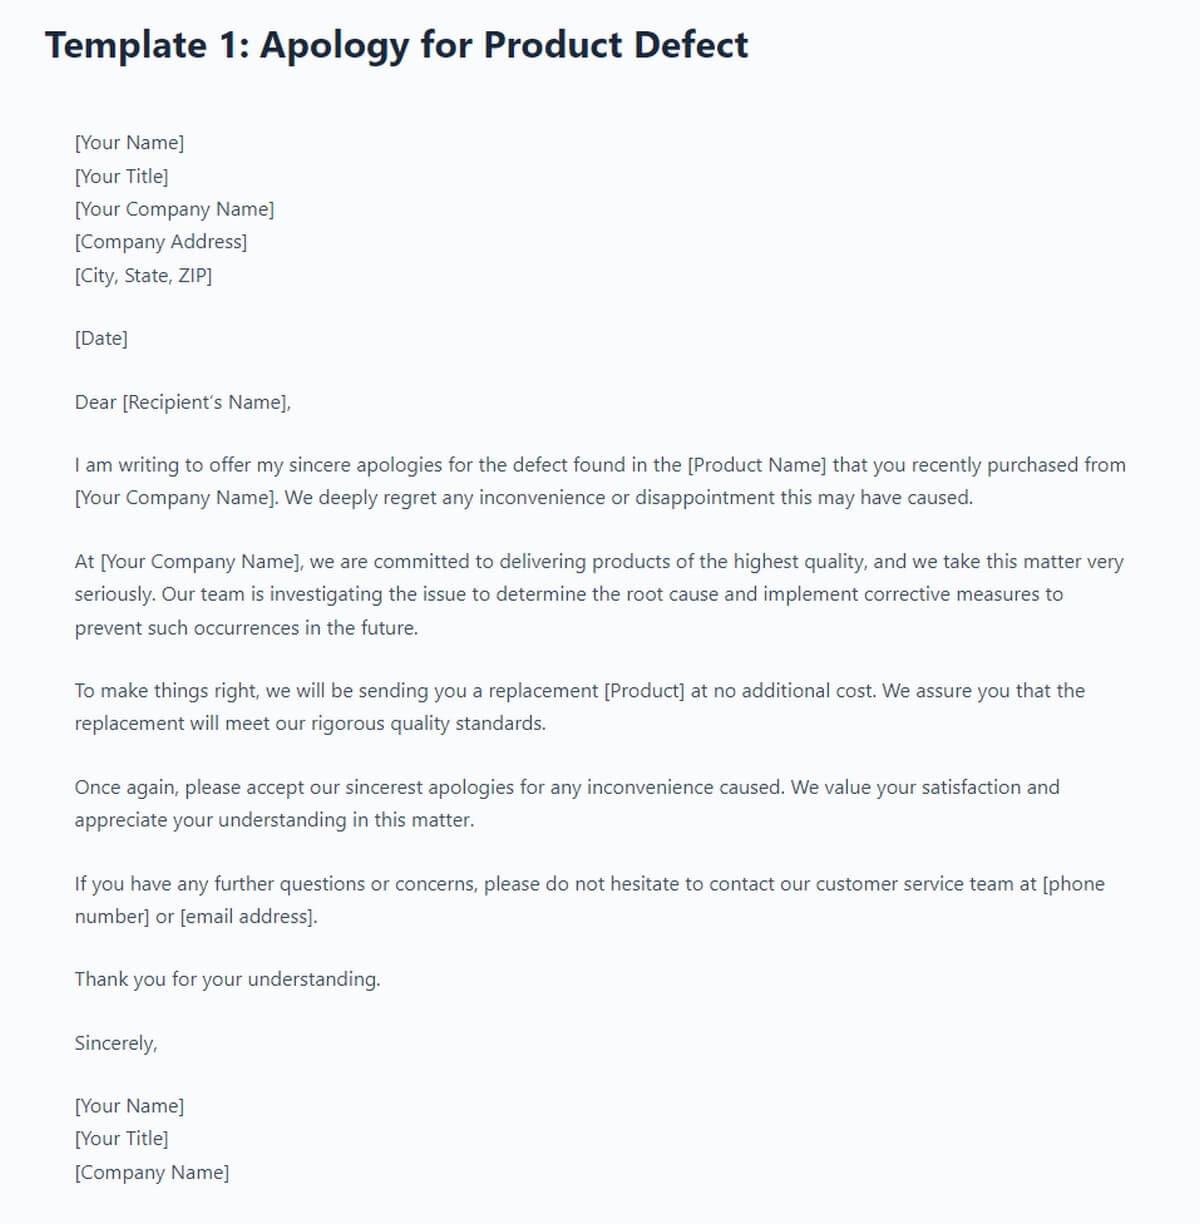 Sample business apology letter template